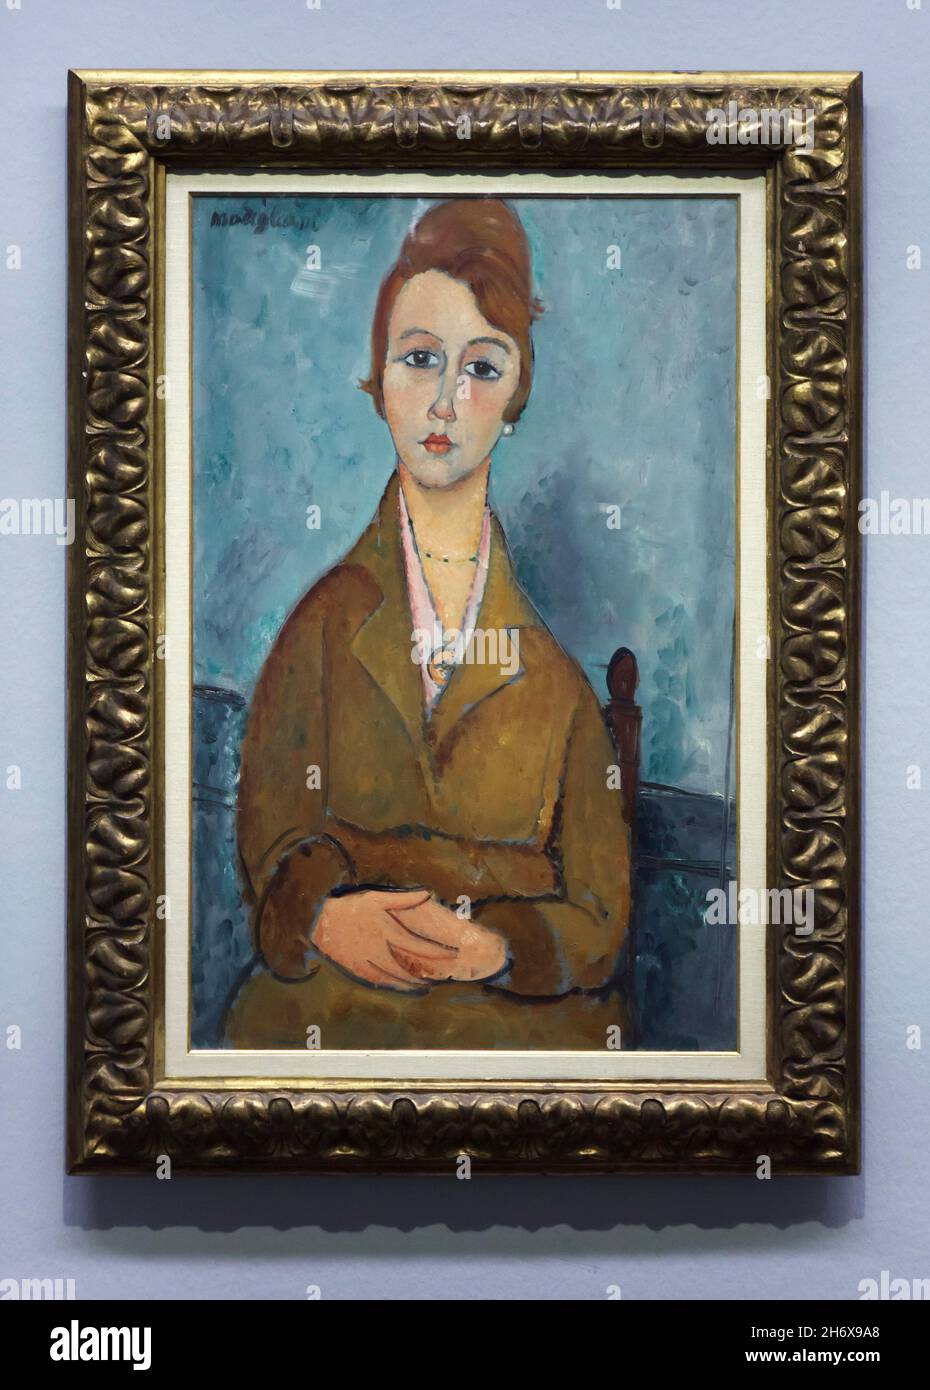 Painting 'Young Lolotte' by Italian modernist painter Amedeo Modigliani (1918) on display at his retrospective exhibition in the Albertina Museum in Vienna, Austria. The exhibition marking the centenary of artist's death runs till 9 January 2022. Stock Photo